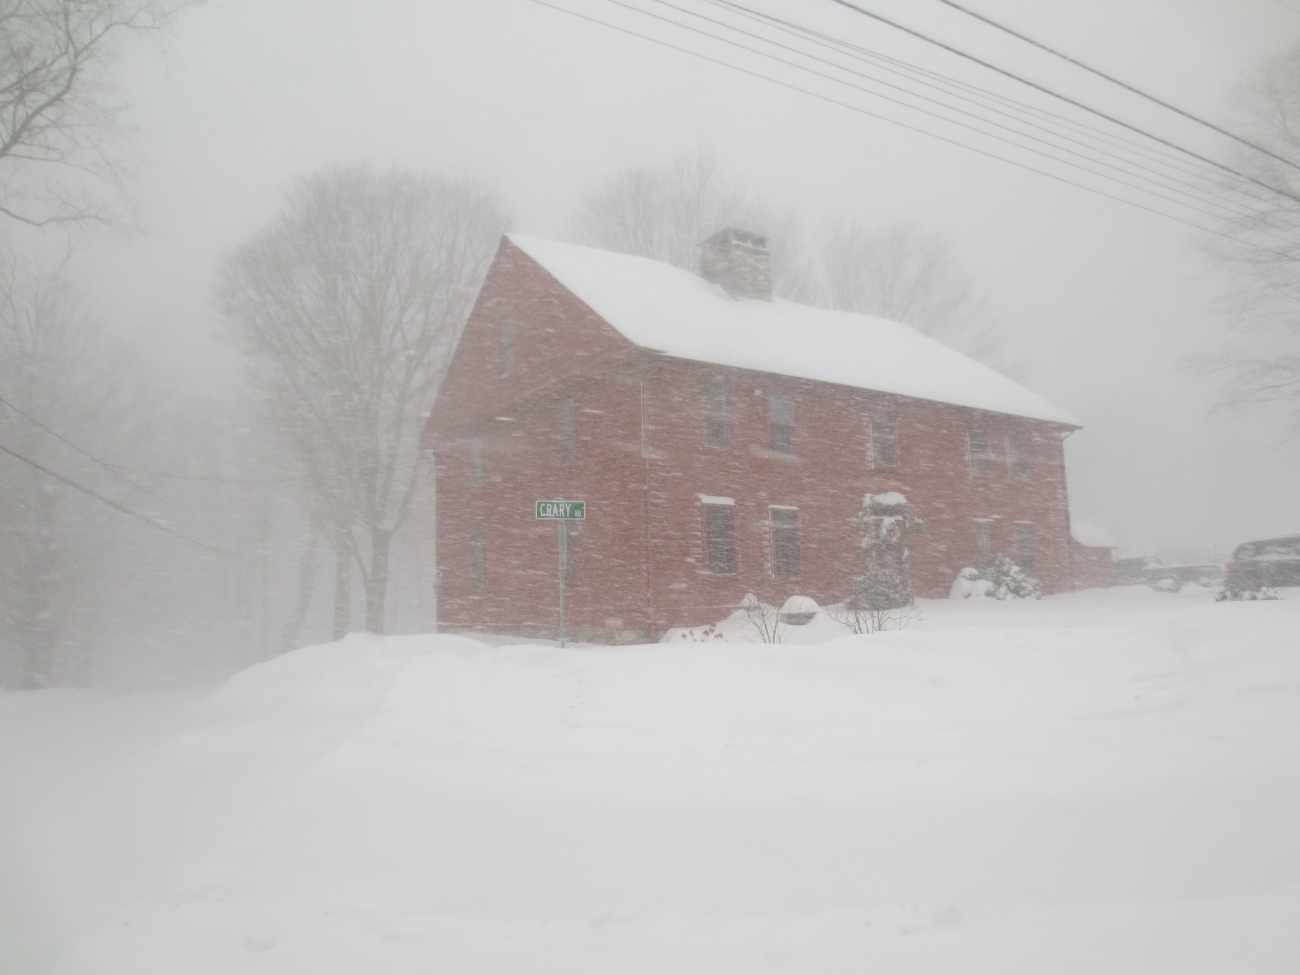 An 18th century house in Southeastern CT weathers Blizzard Juno's nearly 30inches of snow that fell in parts of New E